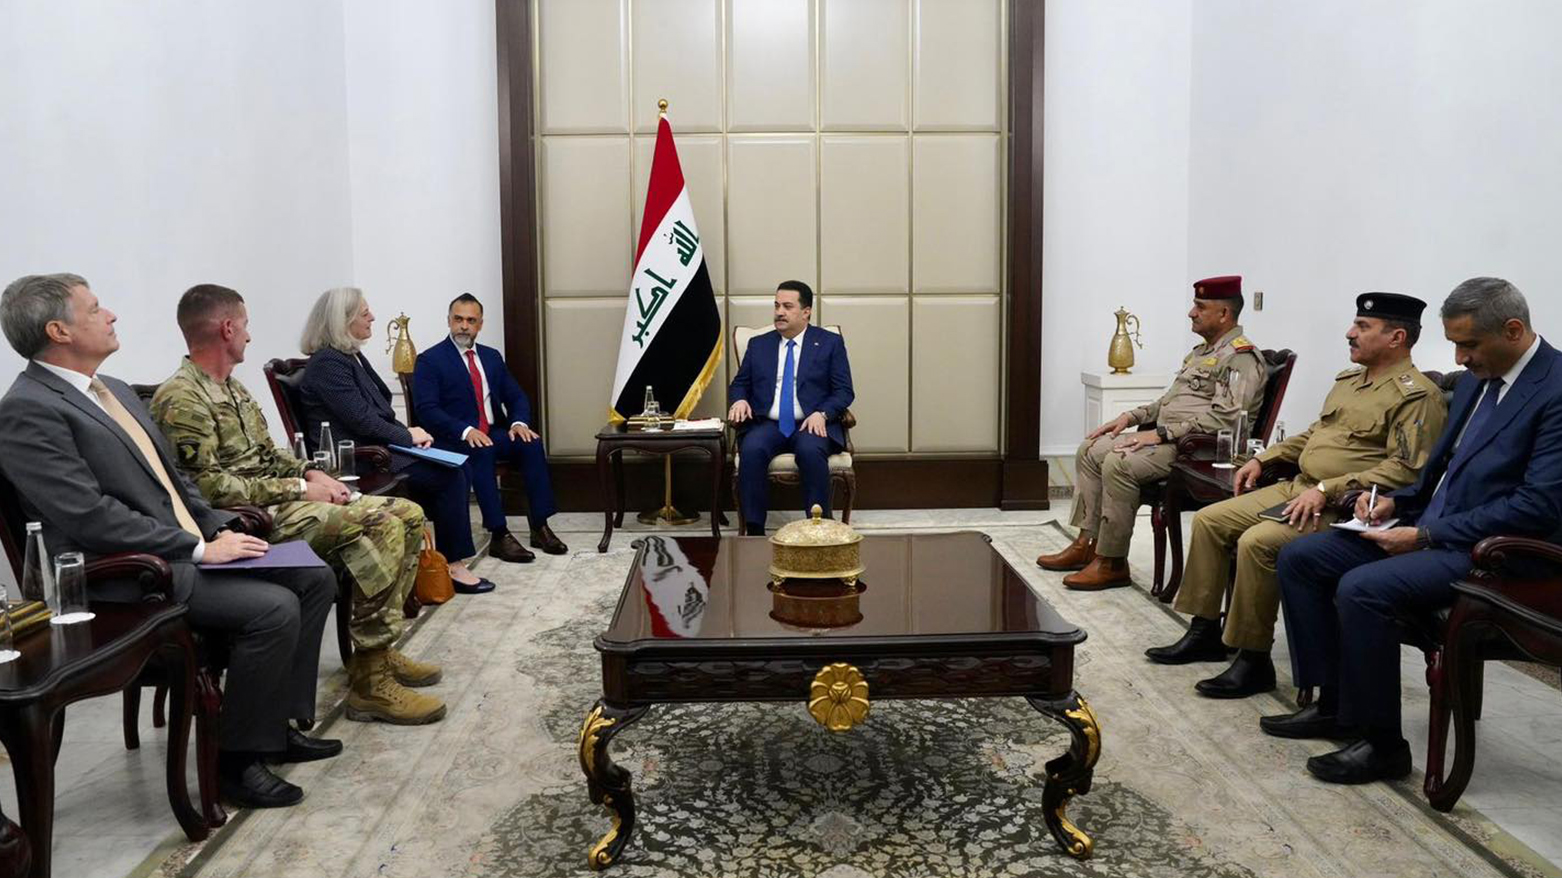 Major General Joel Vowell (left), the Commander of Combined Joint Task Force - Operation Inherent Resolve (CJTF-OIR) meeting with Iraqi leadership in Baghdad. (Photo: Iraqi Premier's Media Office)